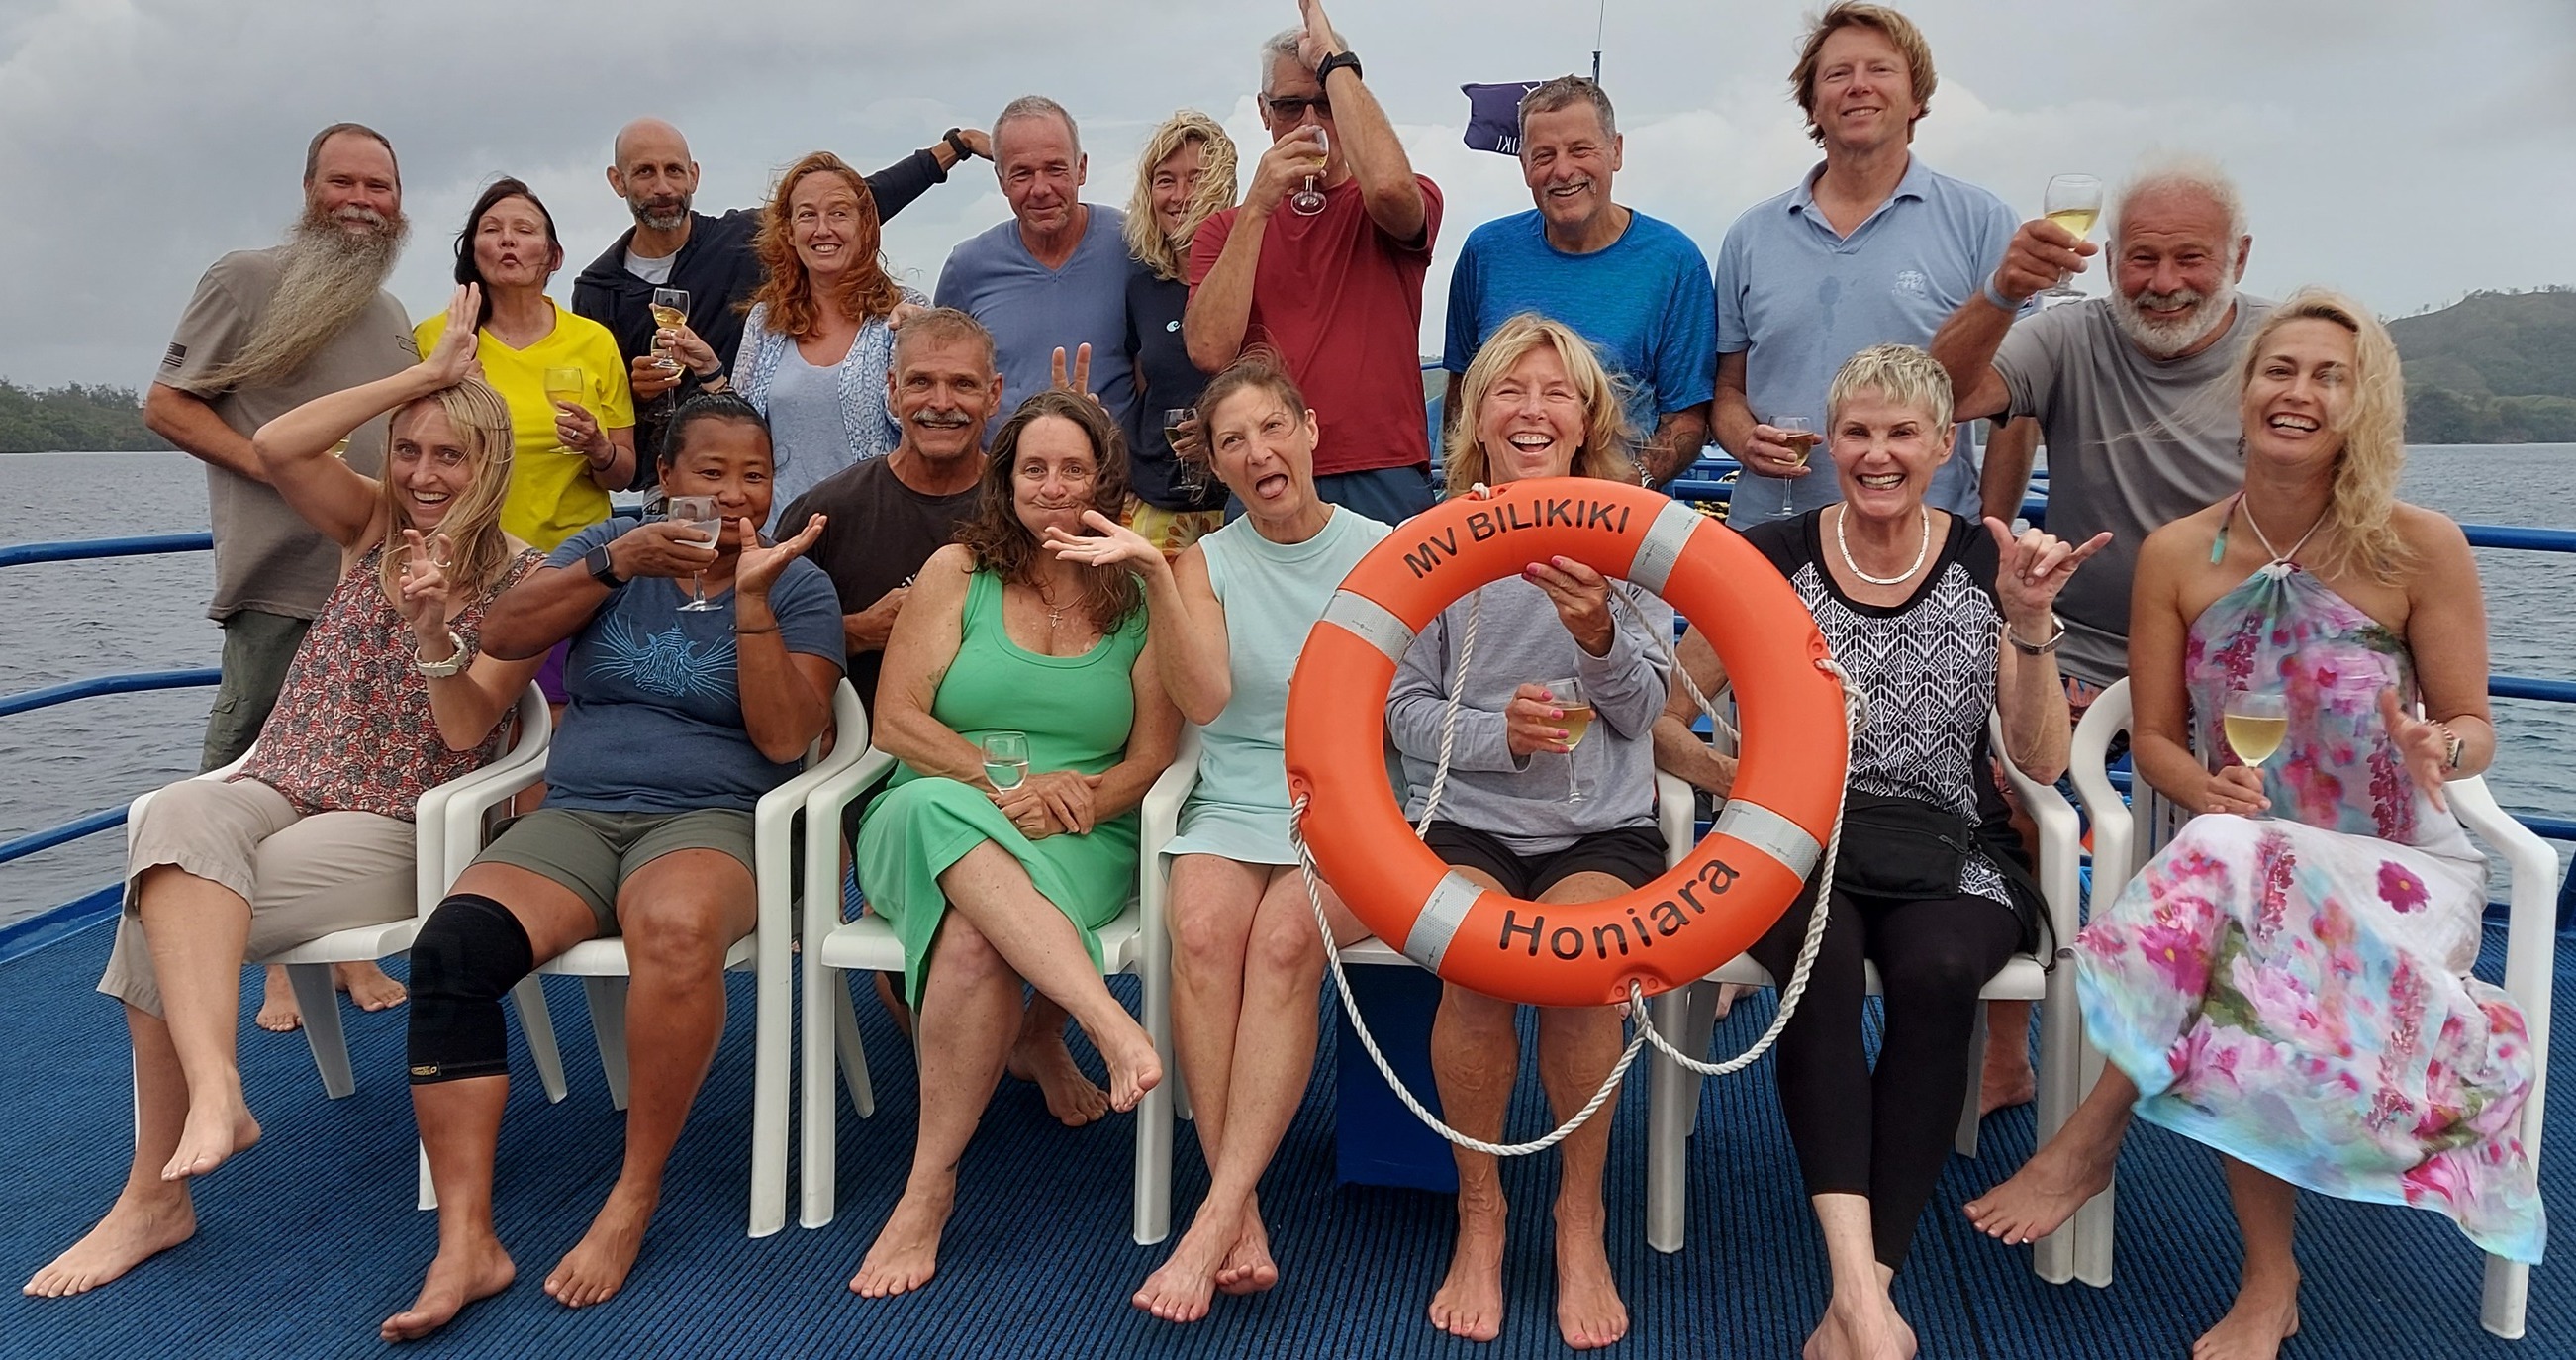 Group Photo on the Bilikiki in the Solomon Islands